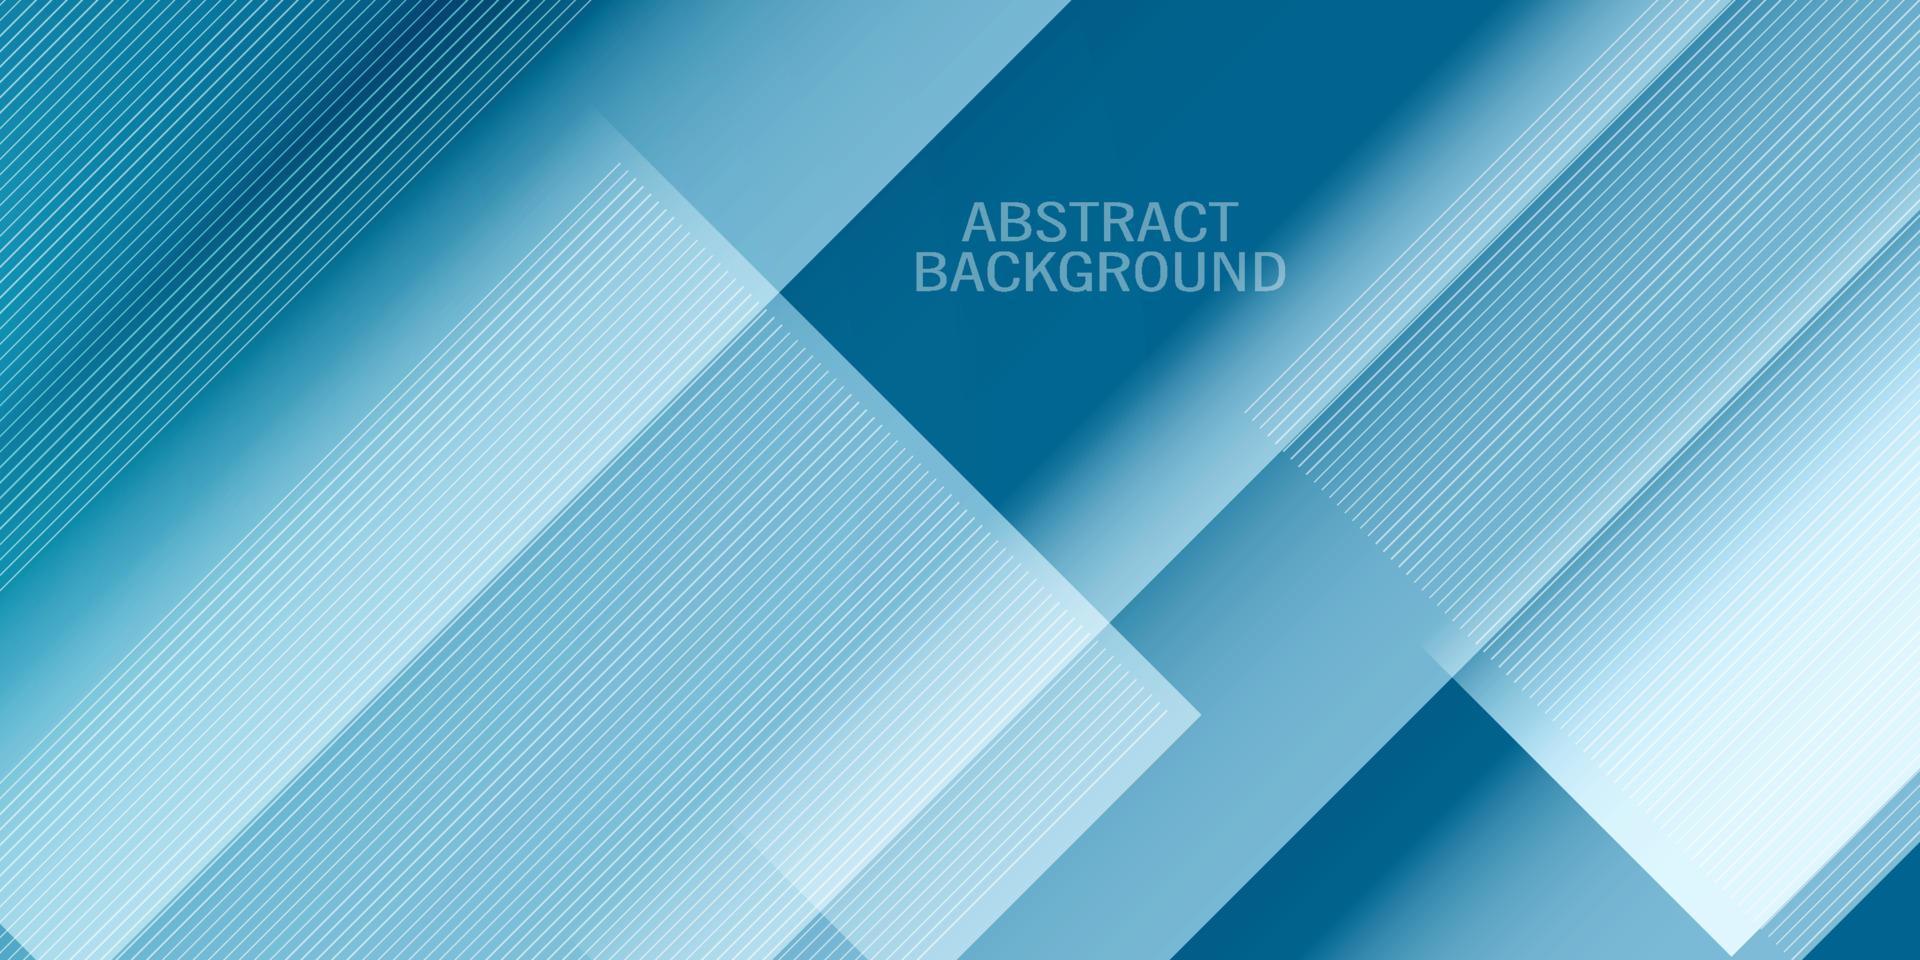 Abstract bright blue background with square shapes and lines. Can be used for fliyers,posters,business cards,Etc. Eps10 vector